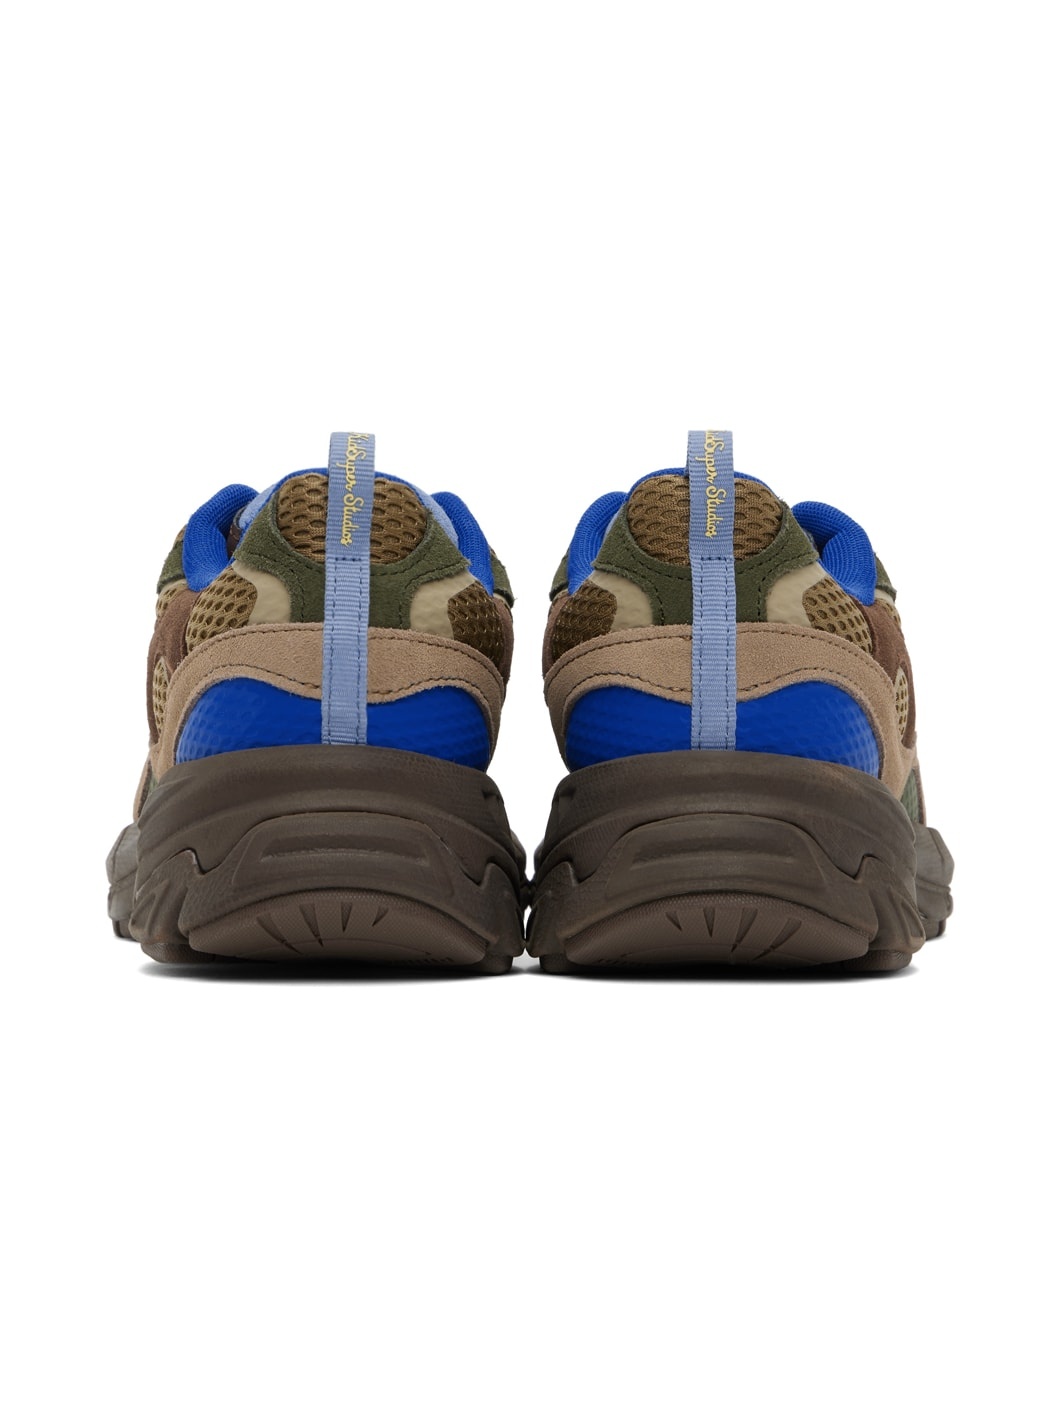 Brown & Blue Puma Edition Velophasis Sneakers - 2